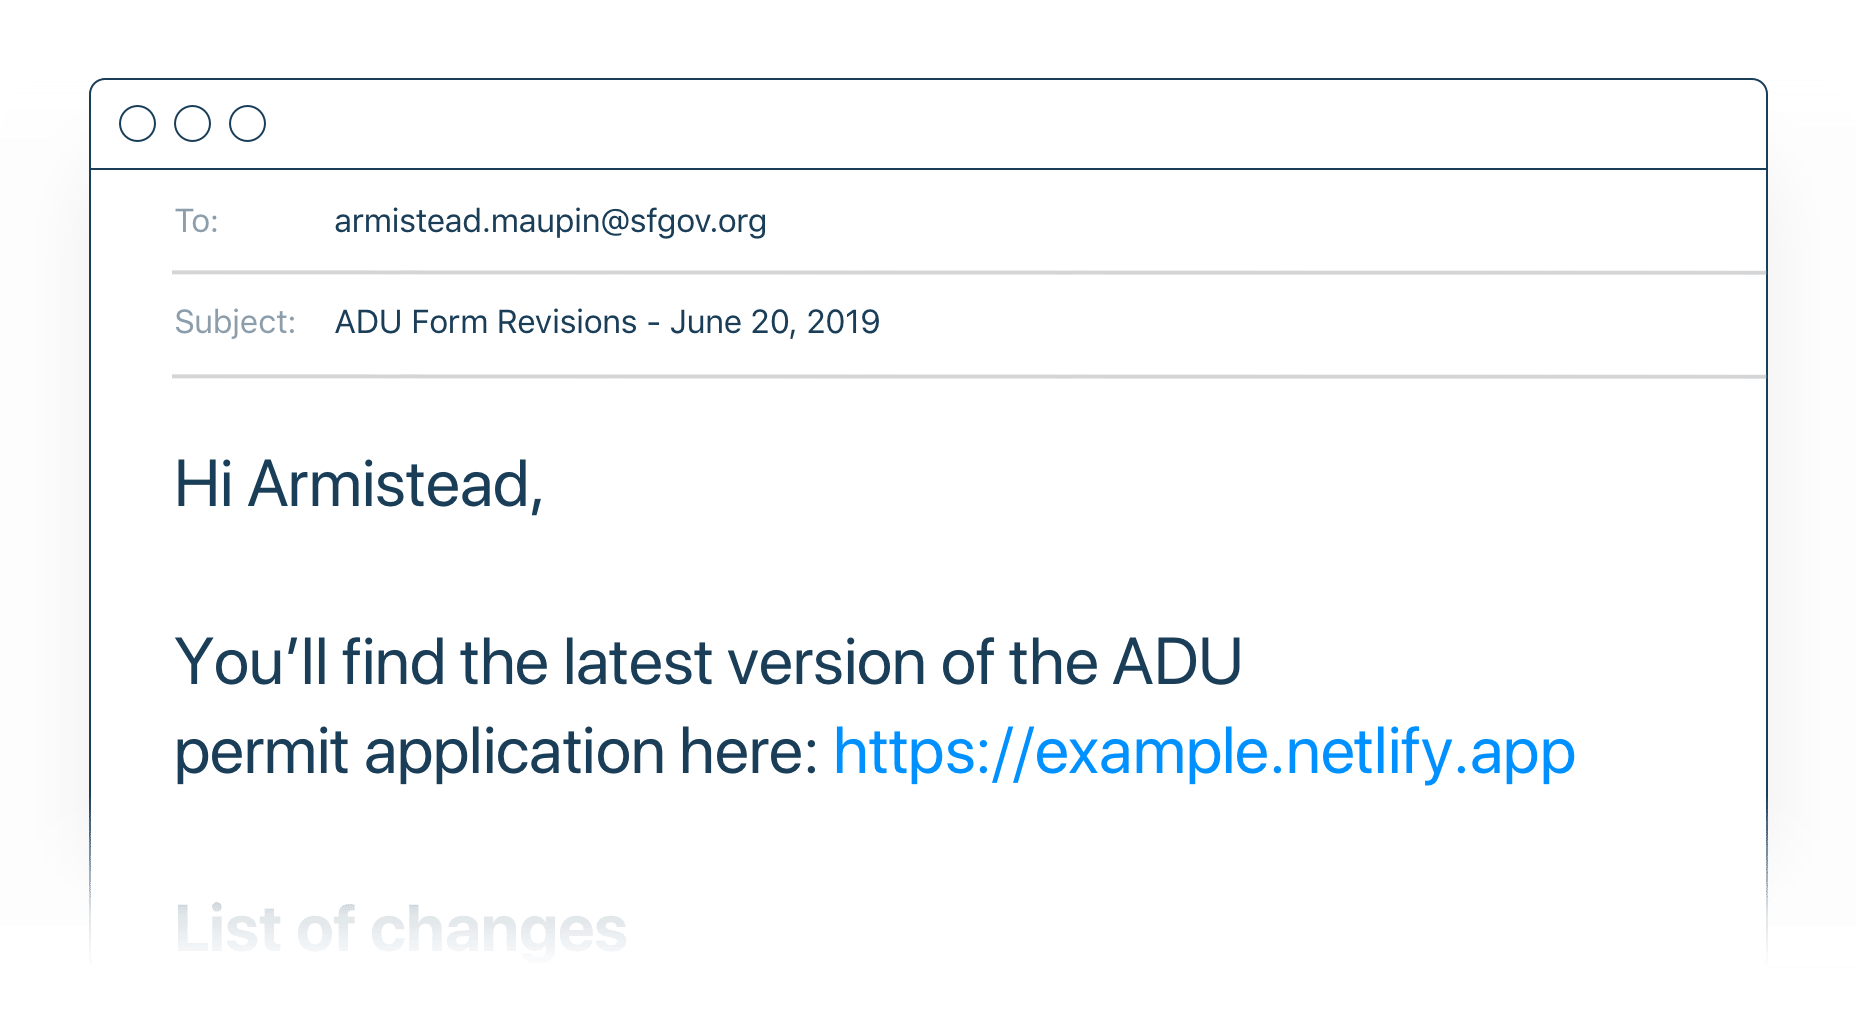 Mockup of an email sent to a.maupin@sfgov.org. Subject line: ADU Form Revisions - June 20, 2019. Text: Hi Armistead, you’ll find the latest version of the ADU permit application here.